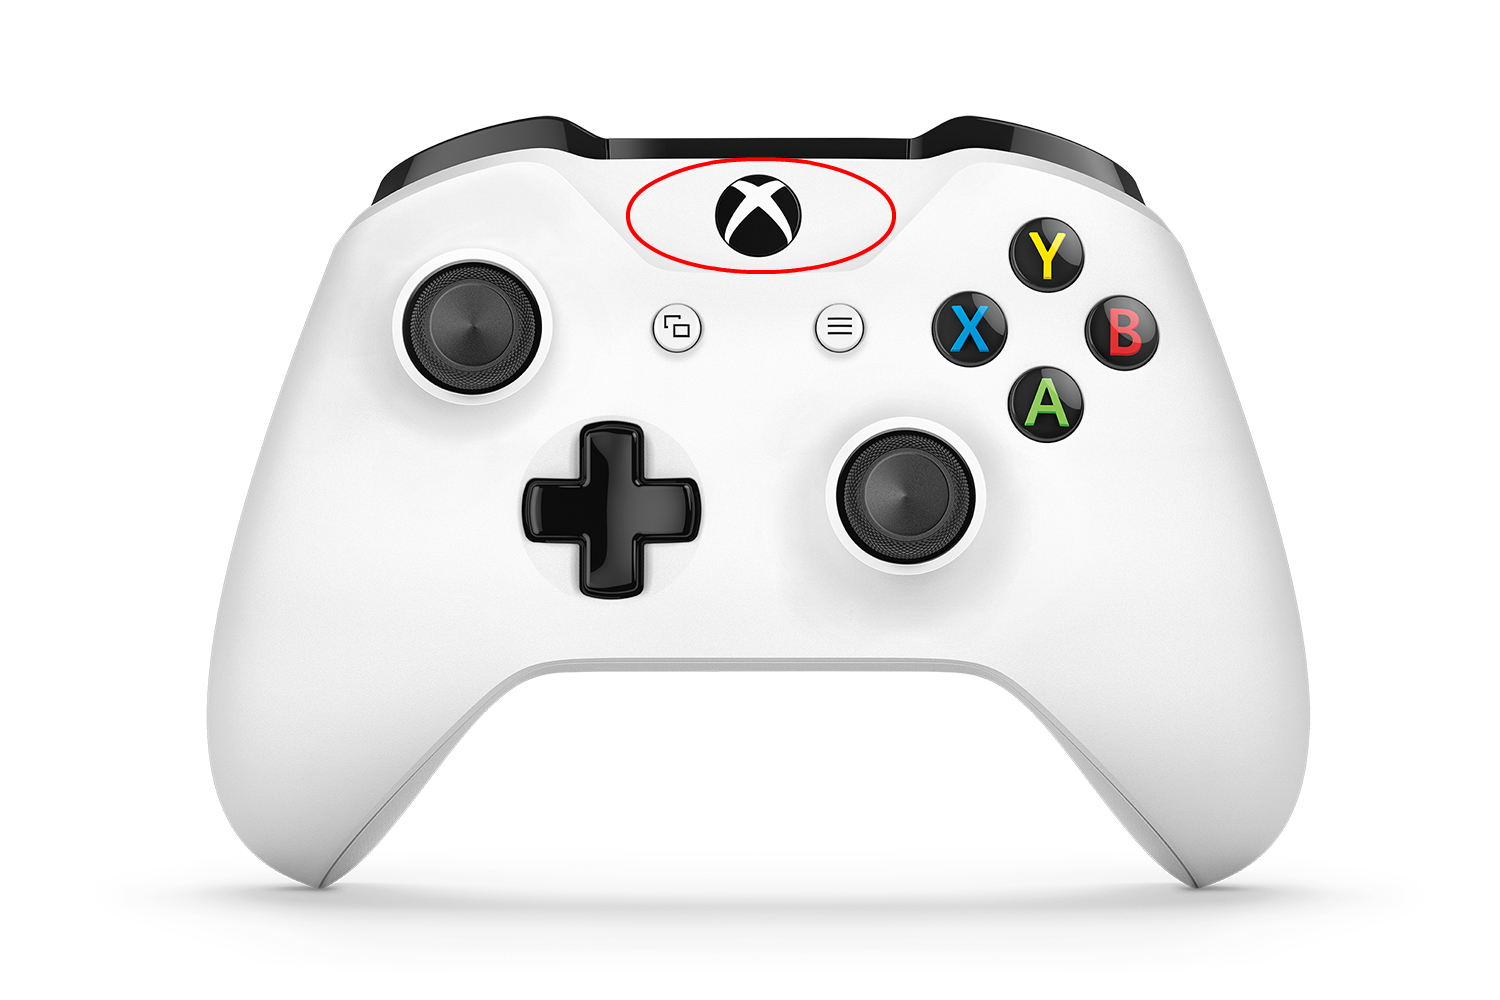 Developer product purchase prompts not showing controls - Xbox